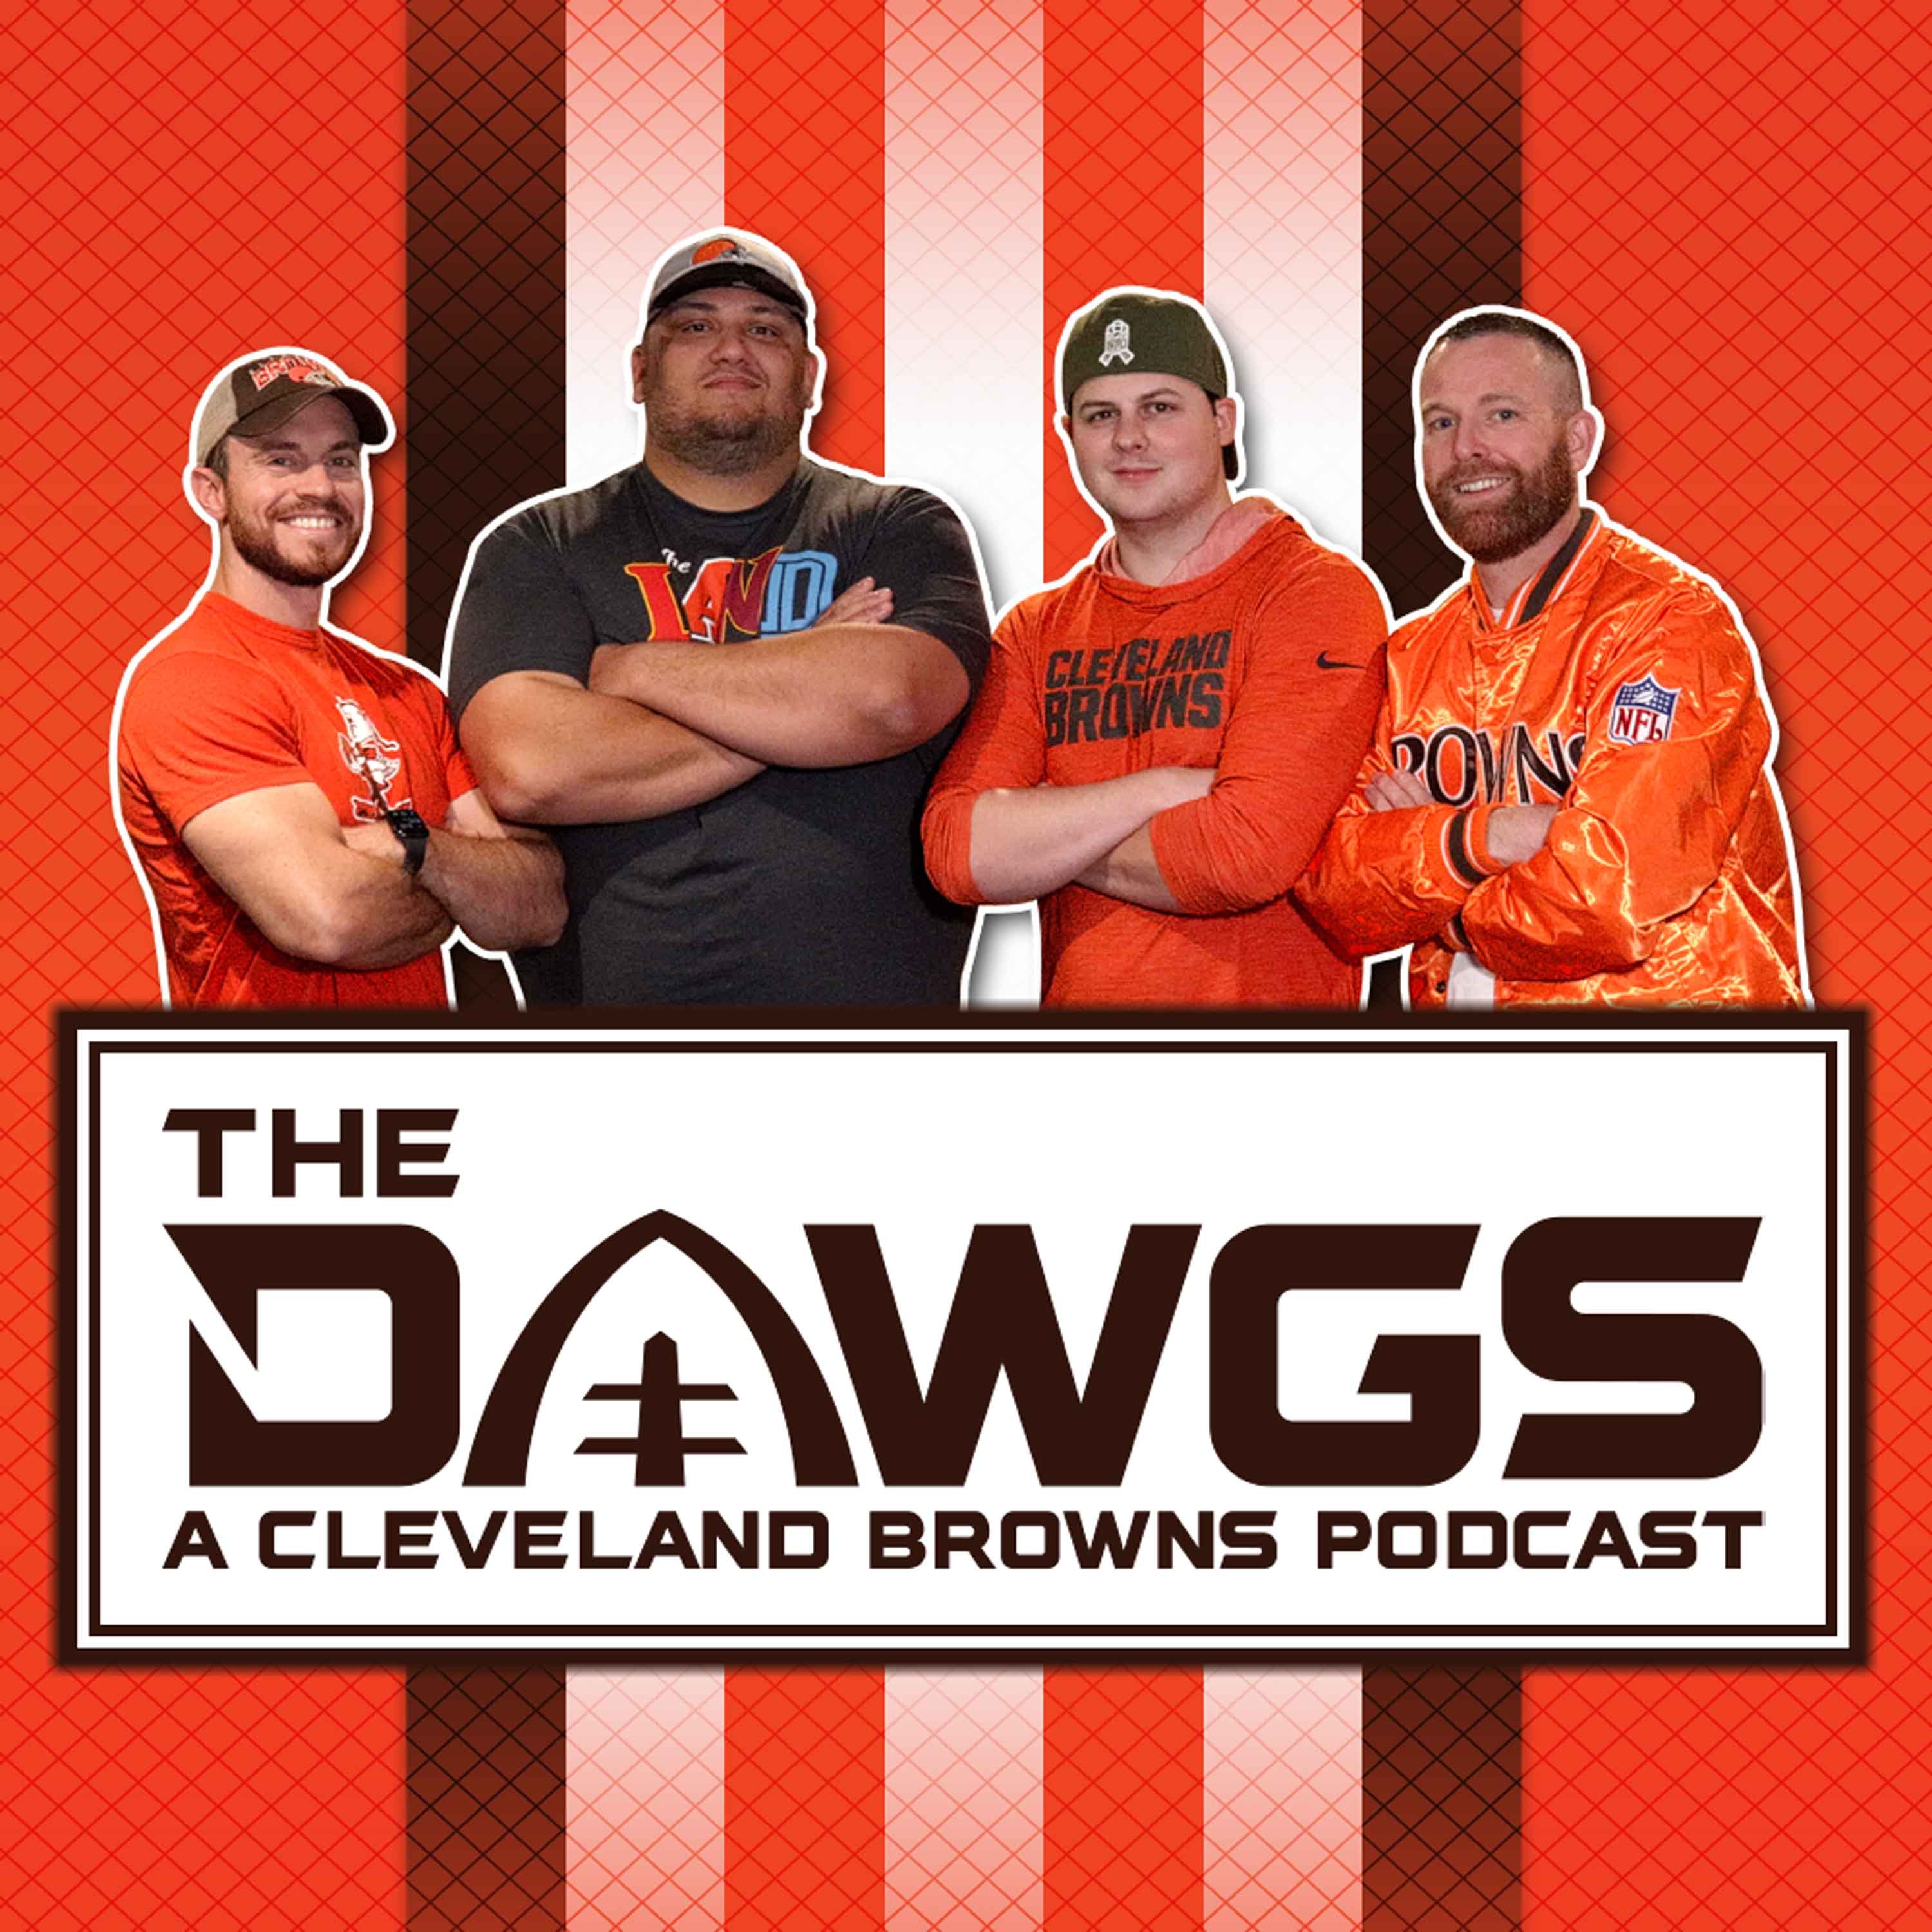 Week 15 Recap - Browns Grind Out the Win Over the Ratbirds  | The Dawgs - A Cleveland Browns Podcast - December 20, 2022